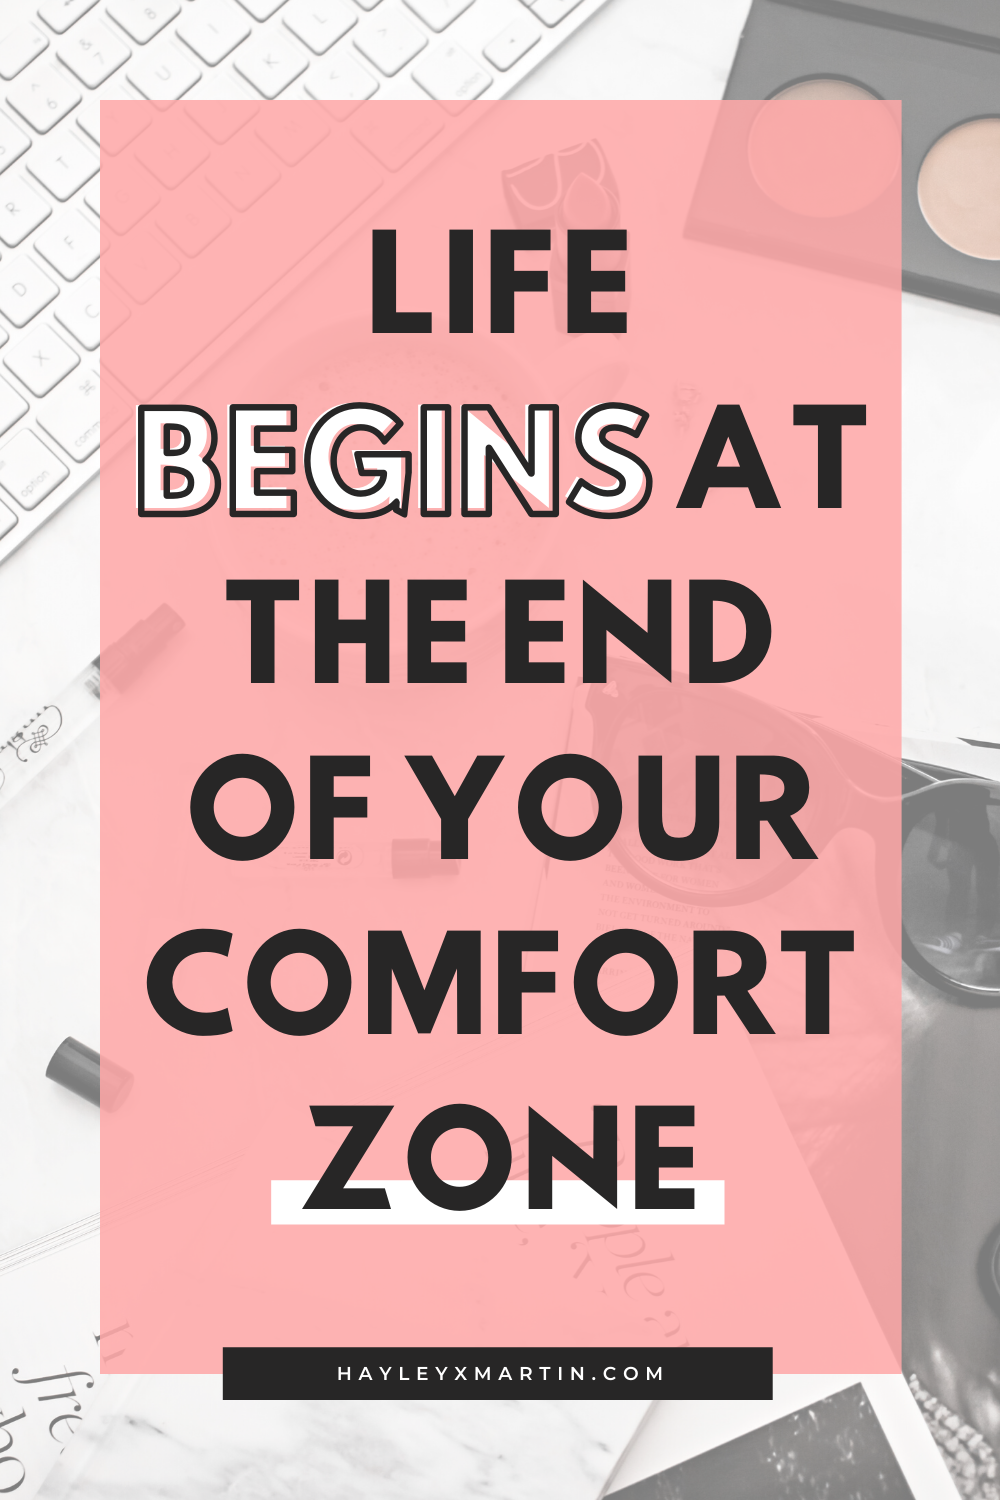 LIFE BEGINS AT THE END OF YOUR COMFORT ZONE | HAYLEYXMARTIN